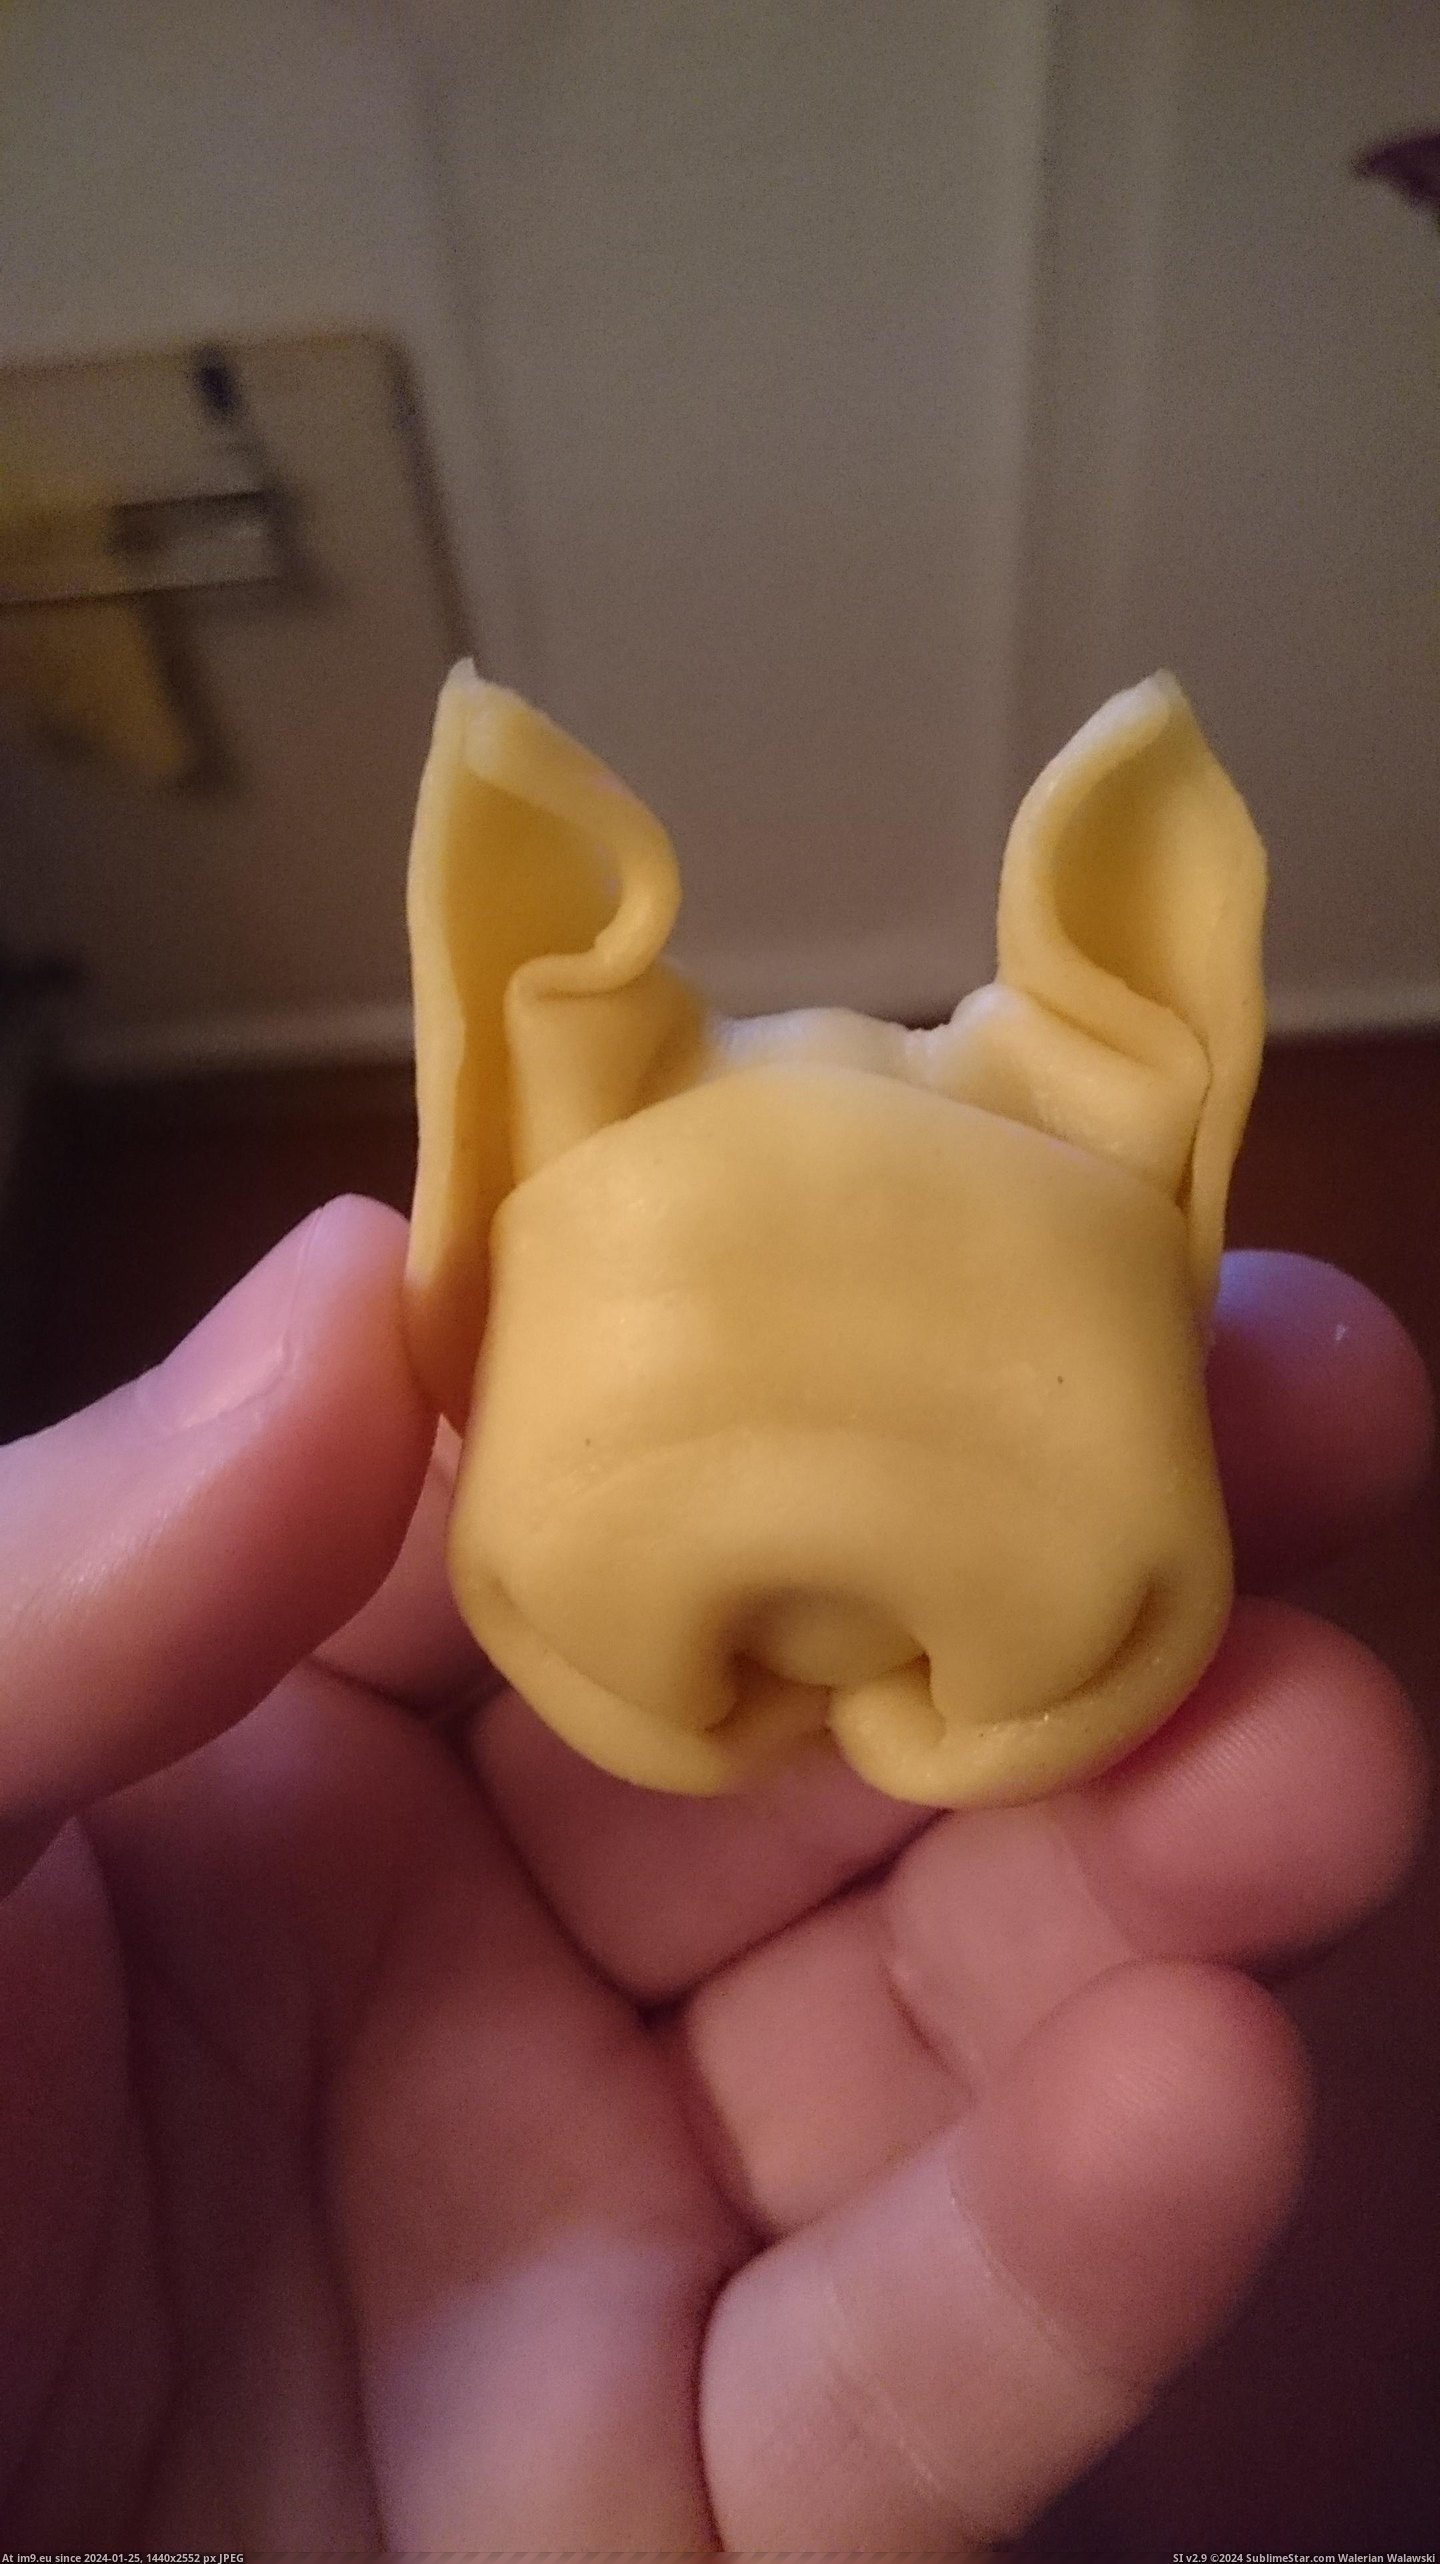 #Two #French #Pieces #Bulldog #Pasta #Head #Looked [Mildlyinteresting] These two pieces of pasta looked like the head of a french bulldog. Pic. (Изображение из альбом My r/MILDLYINTERESTING favs))